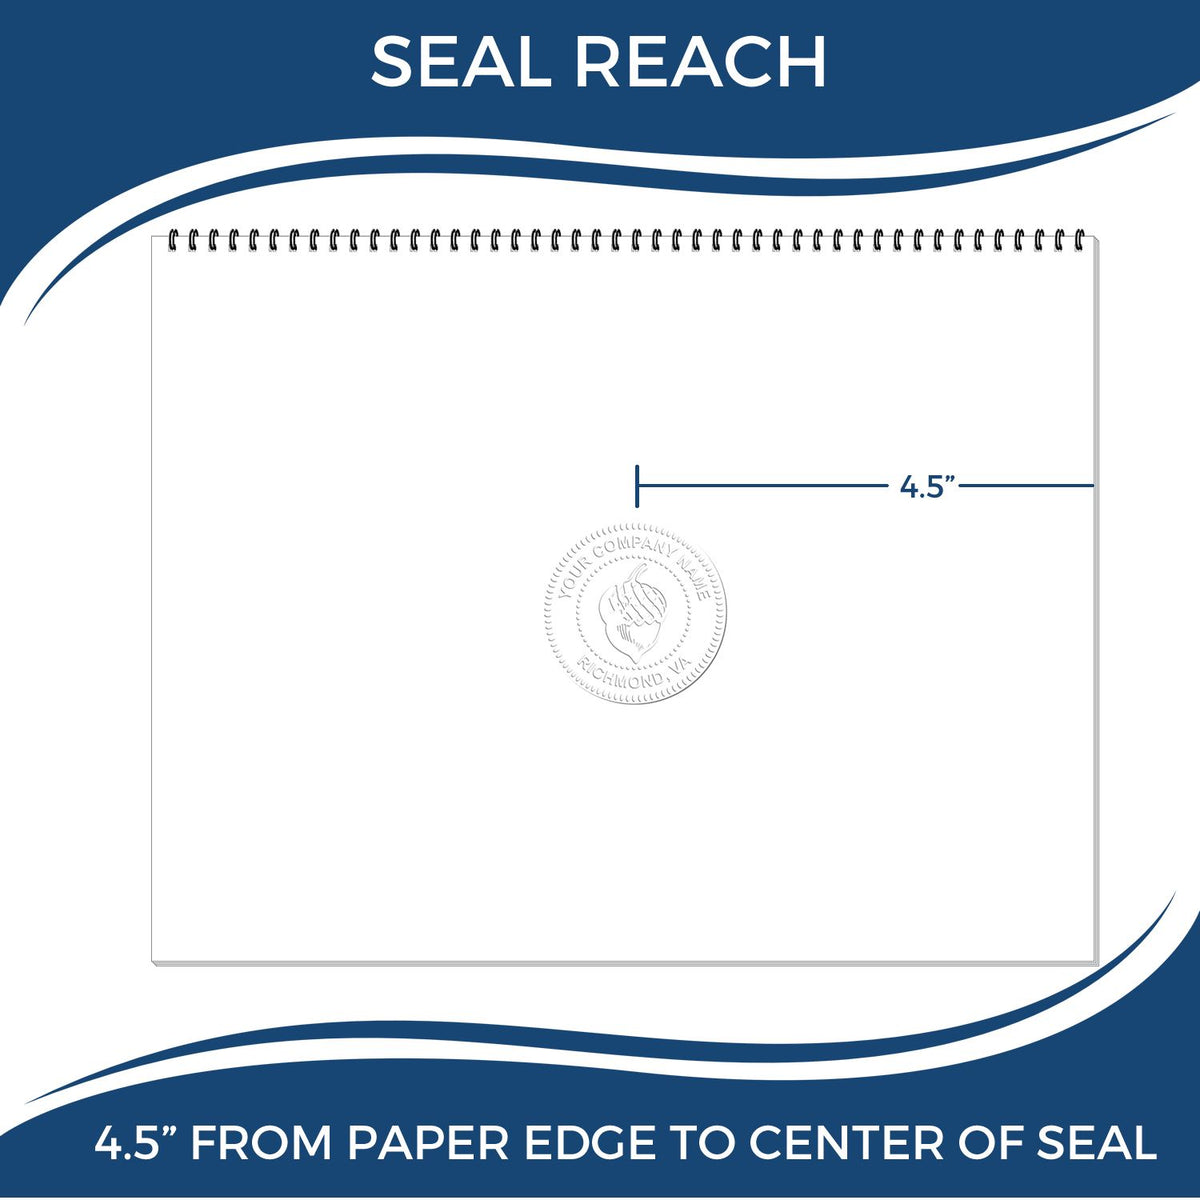 An infographic showing the seal reach which is represented by a ruler and a miniature seal image of the Extended Long Reach Utah Architect Seal Embosser